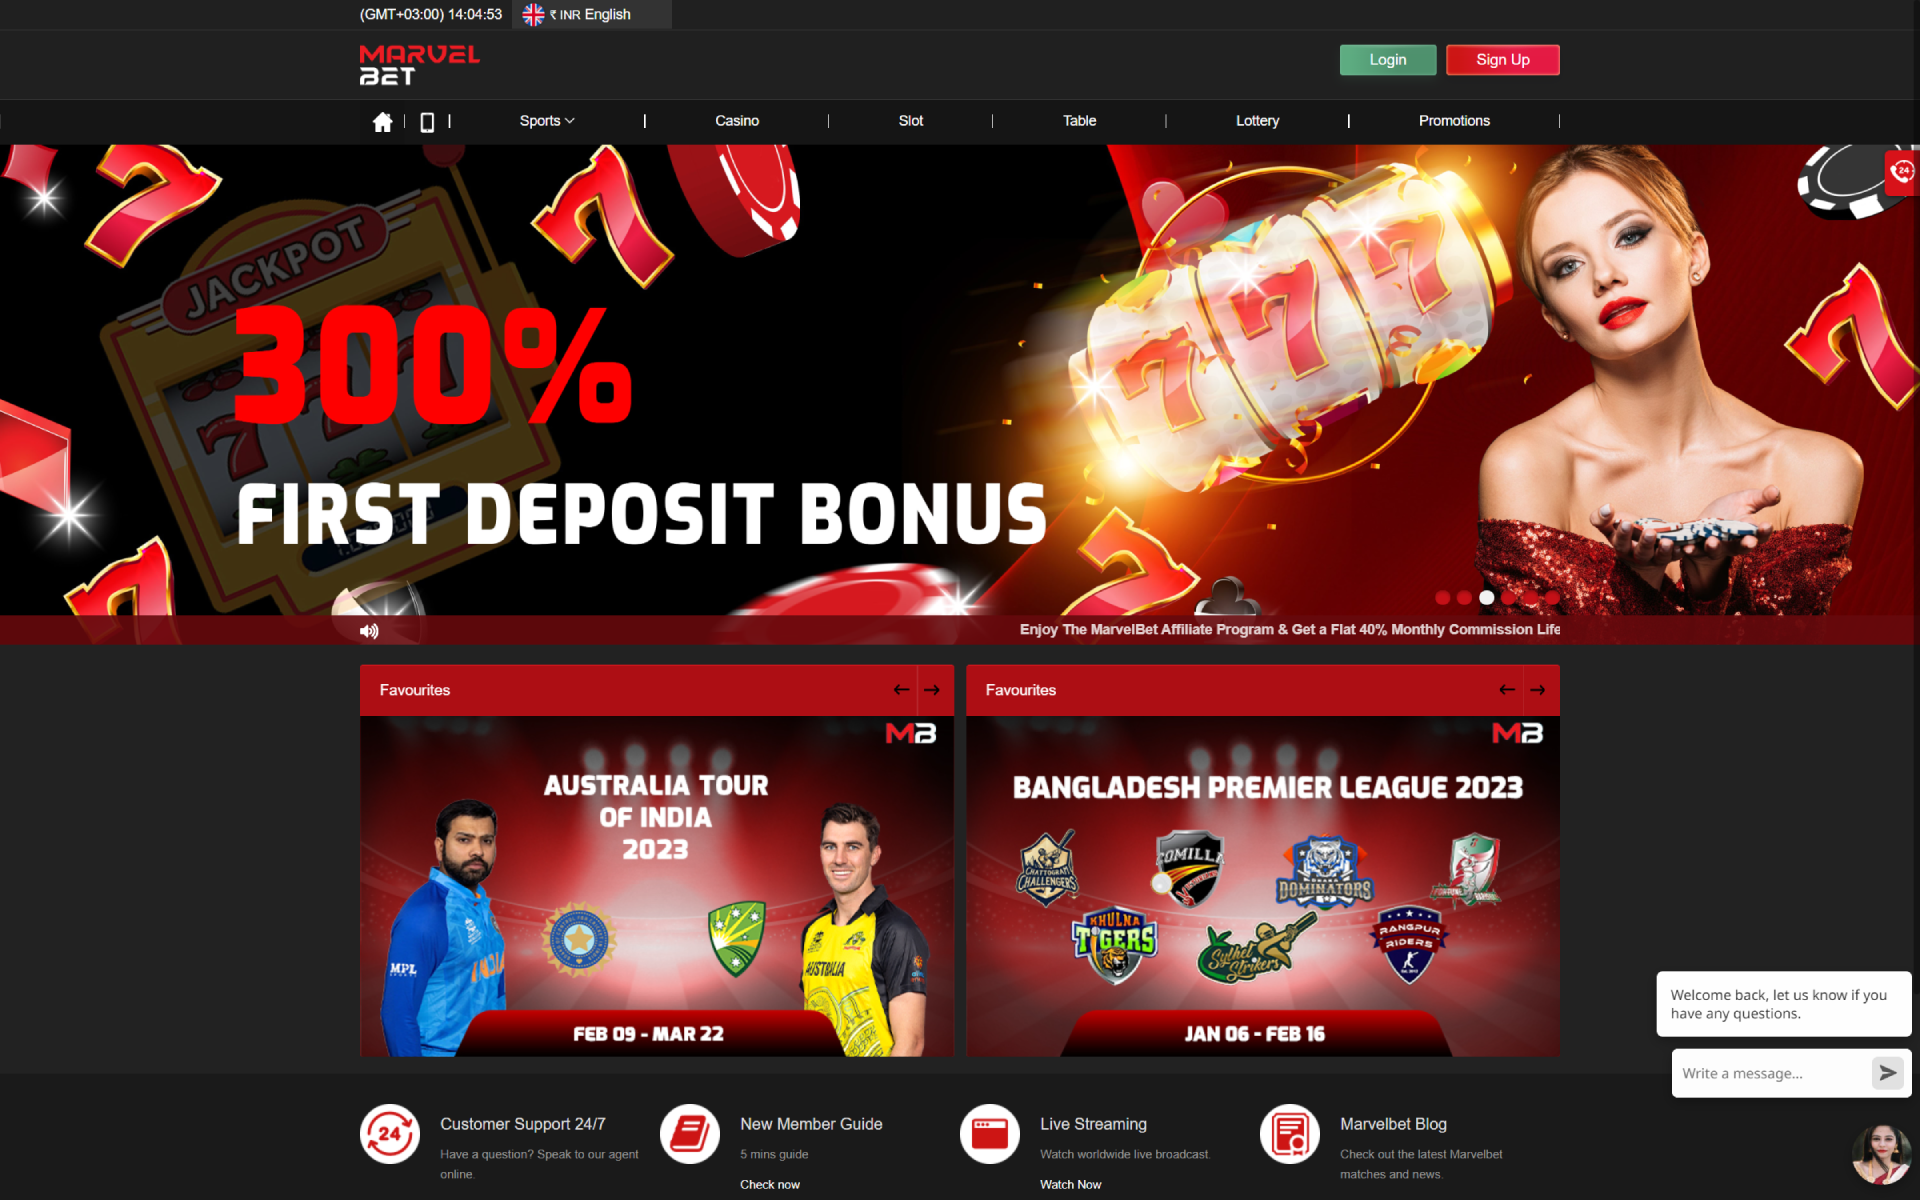 Visit the official website of Marvelbet.